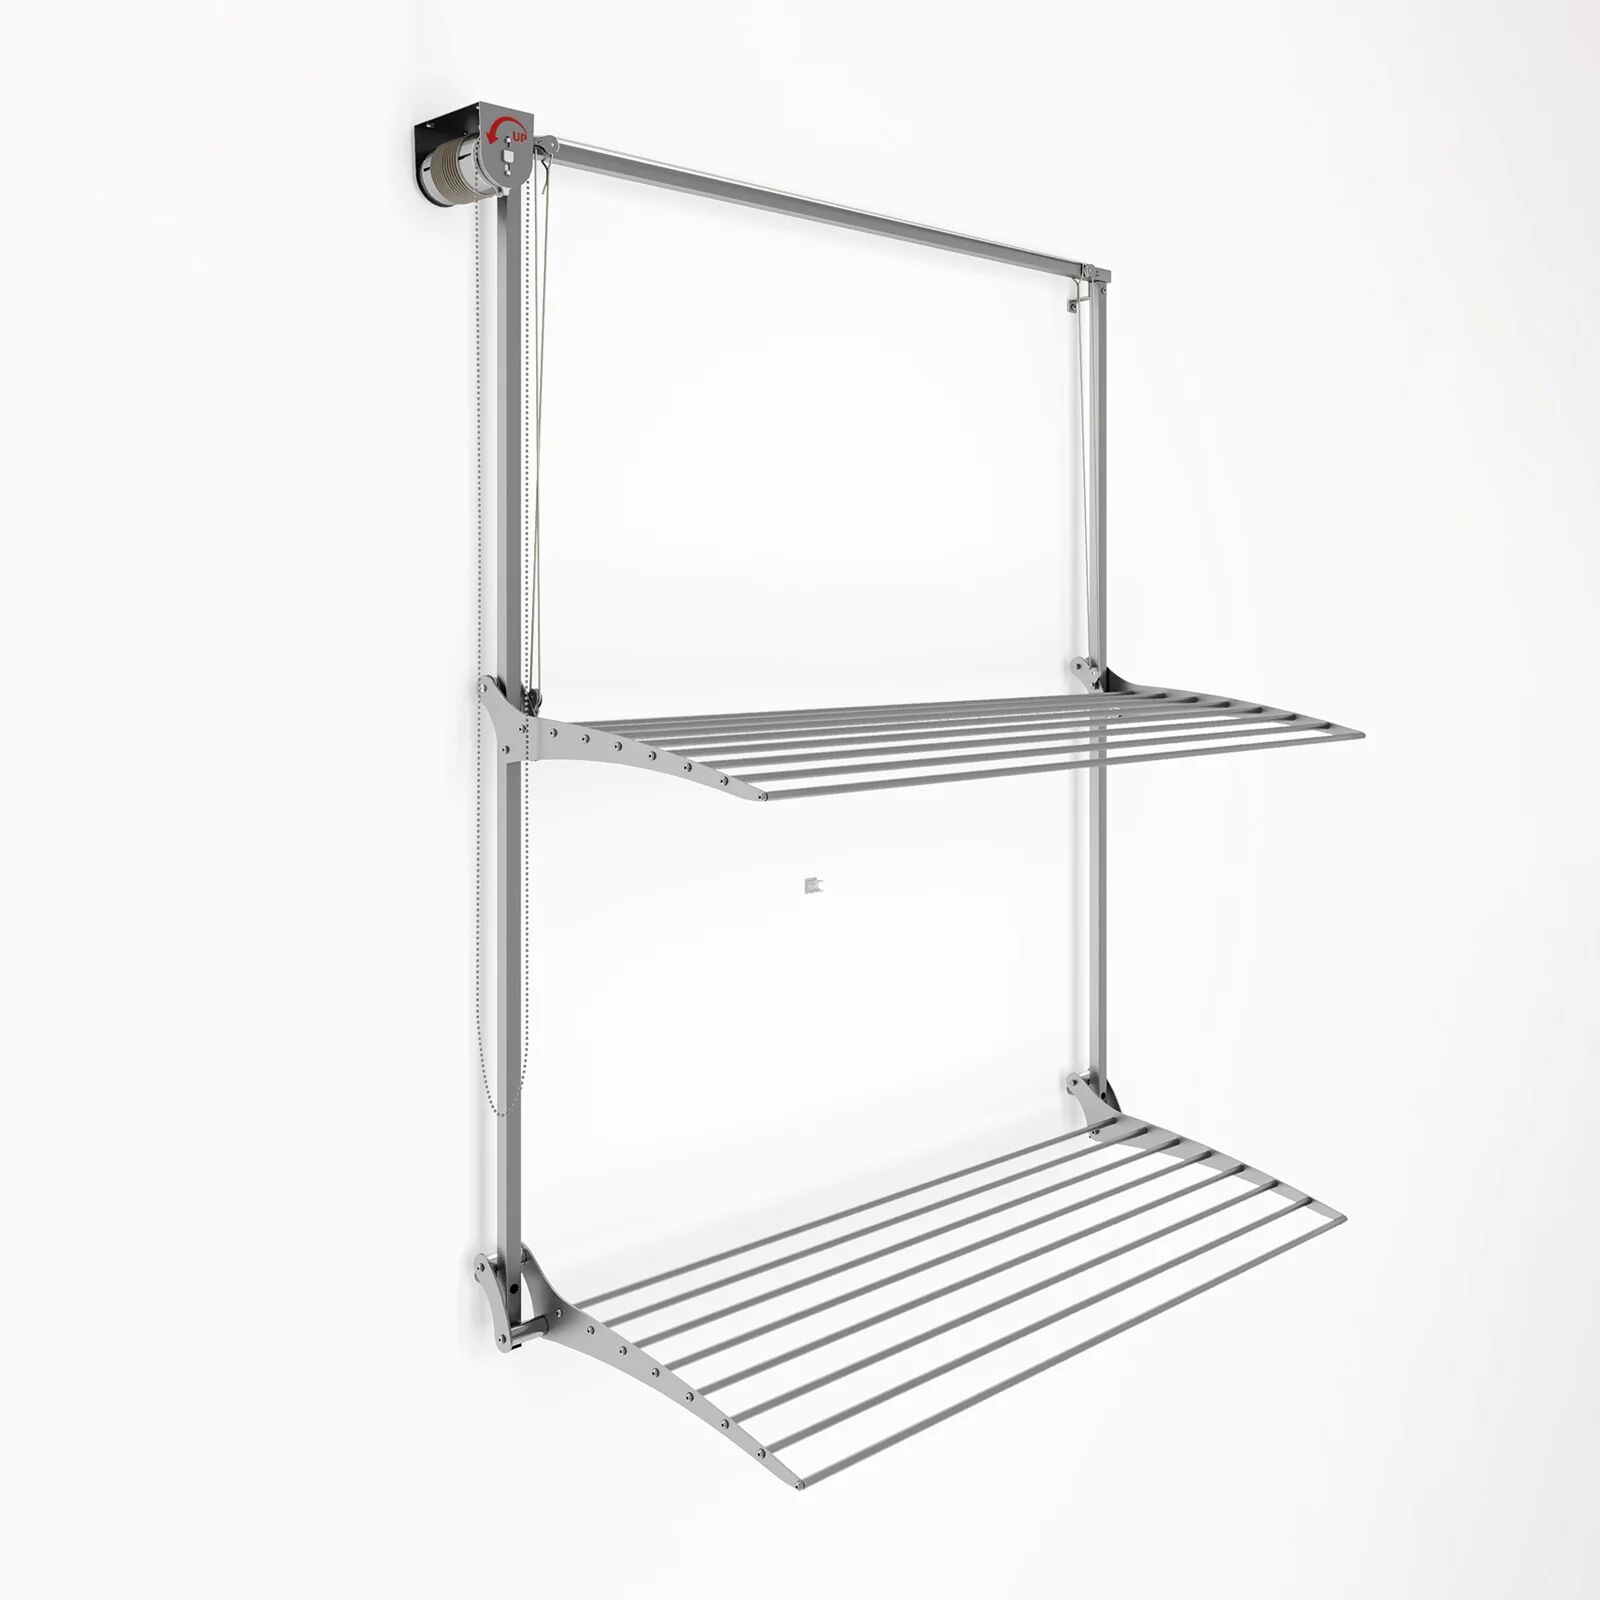 Foxydry Wall Plus 150 wall-mounted space-saving drying rack with two racks